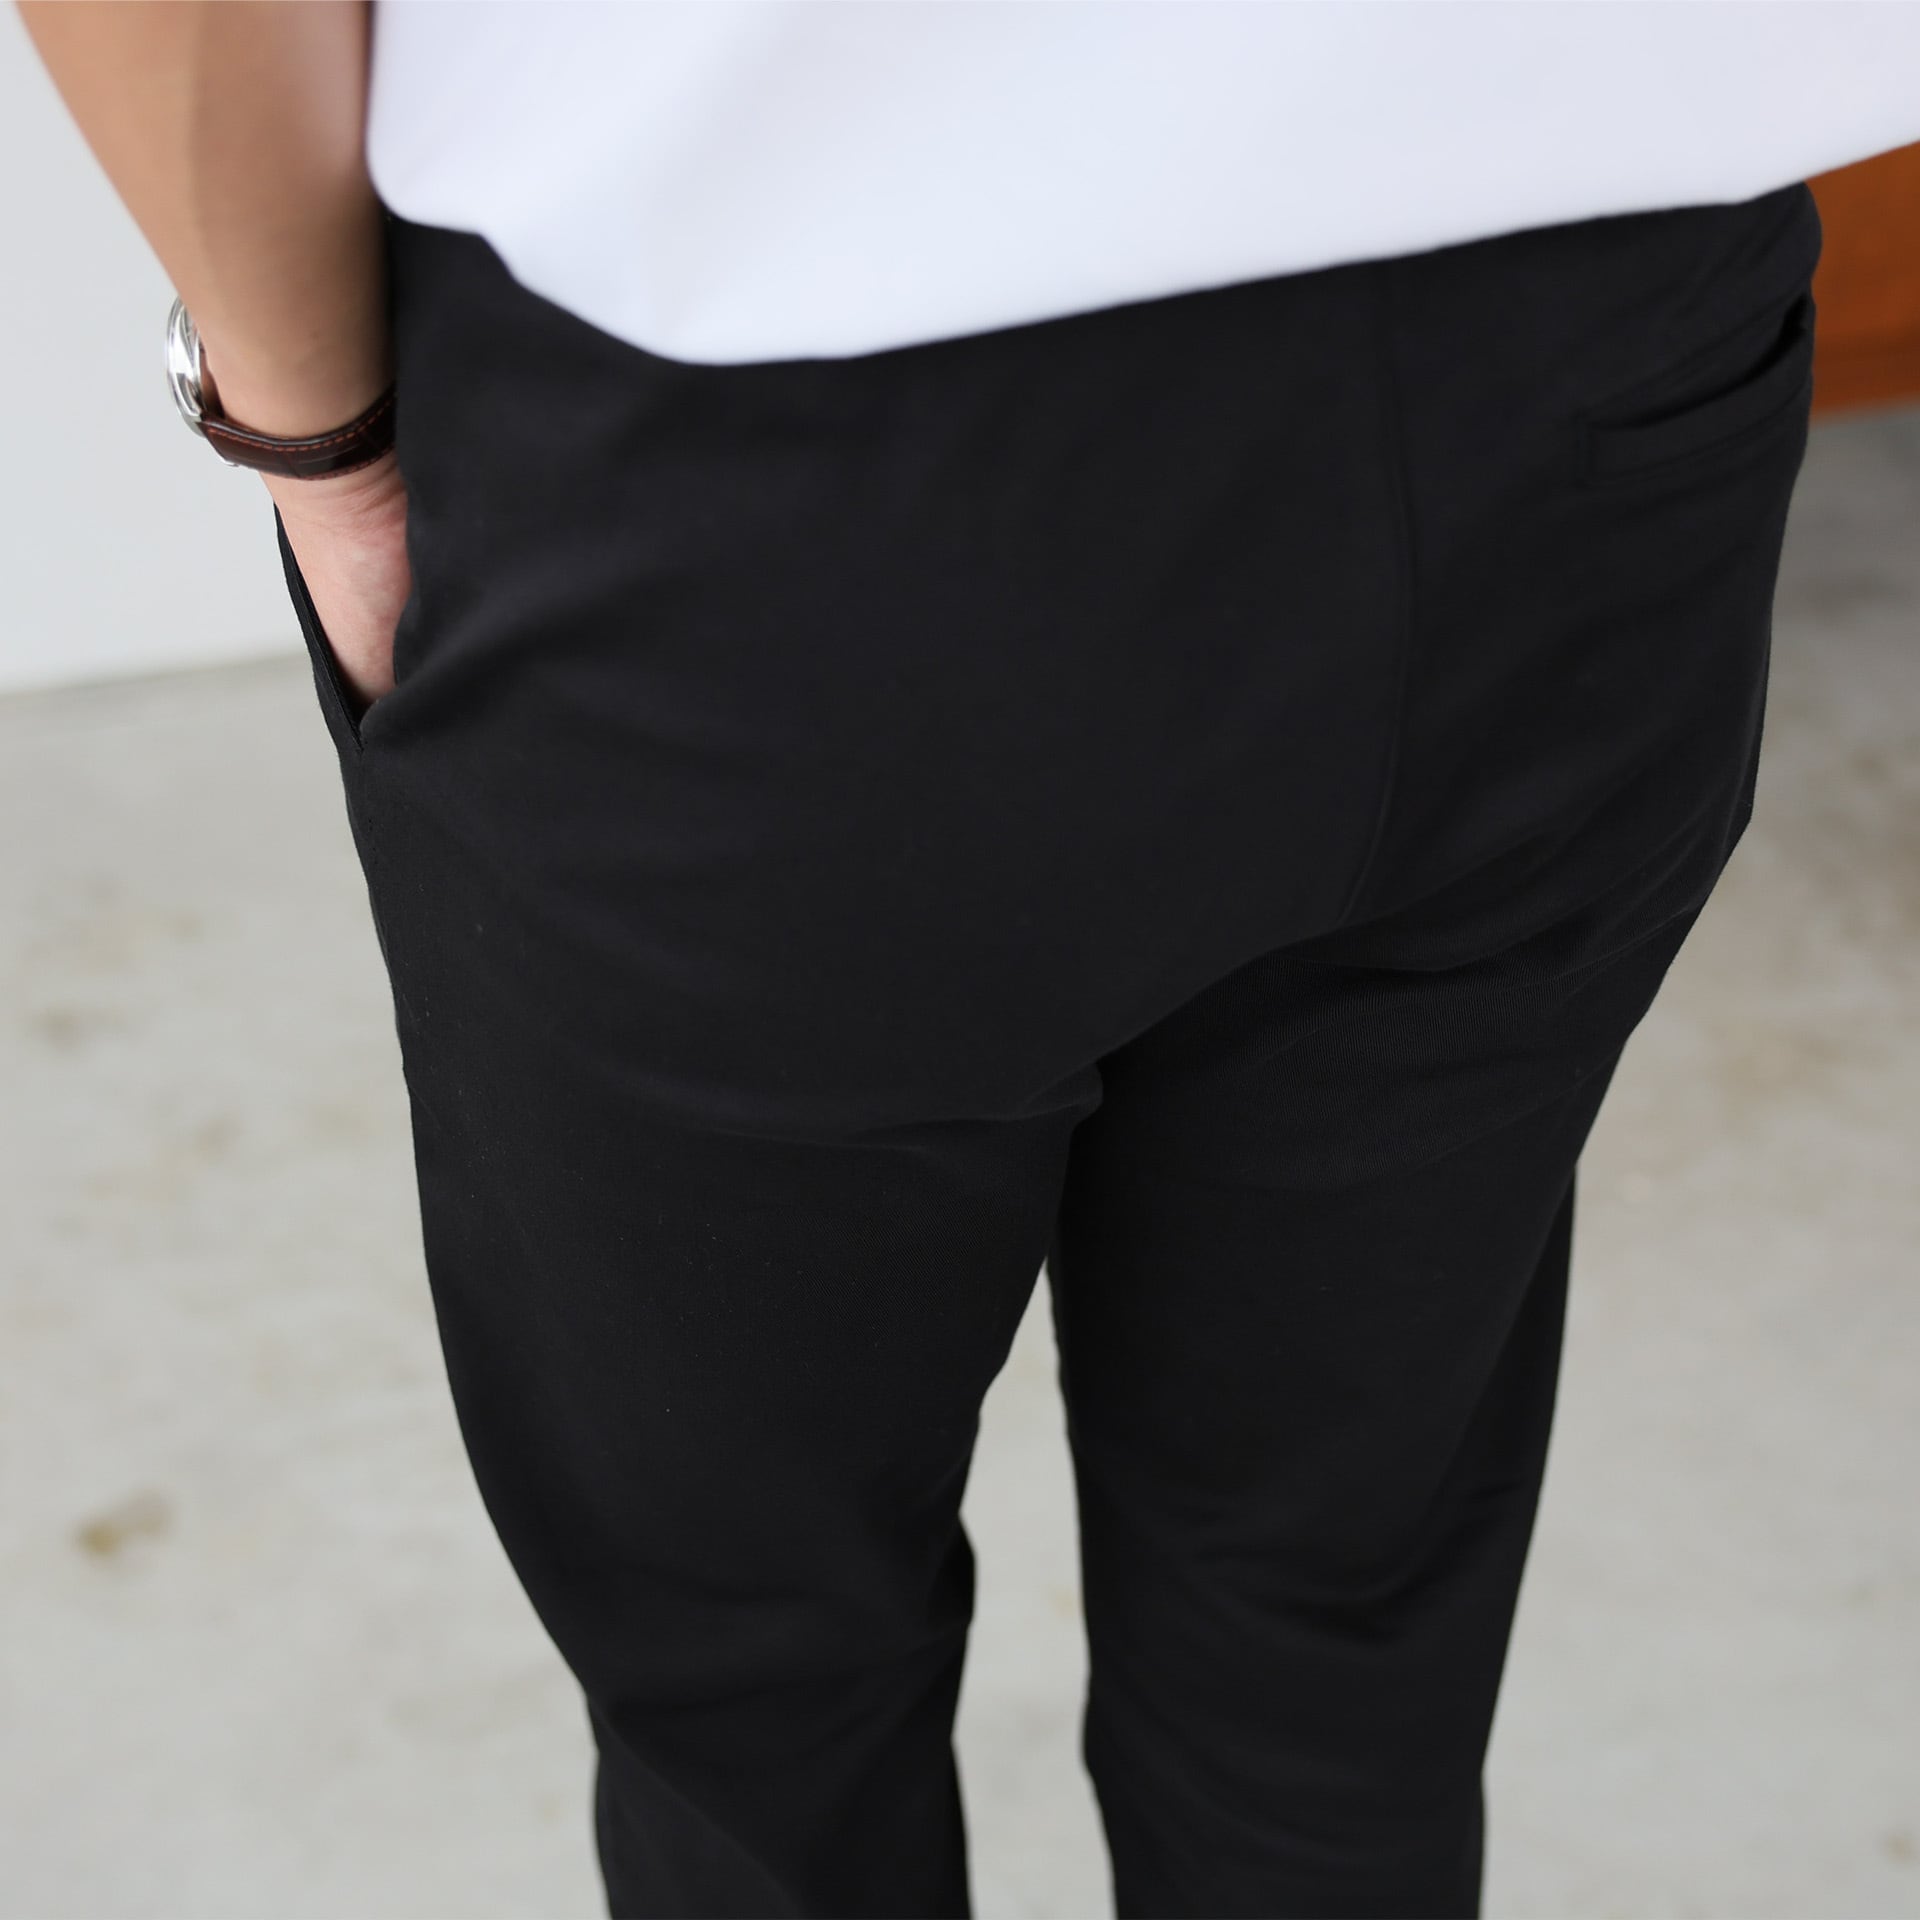 Someday, the ultimate black pants